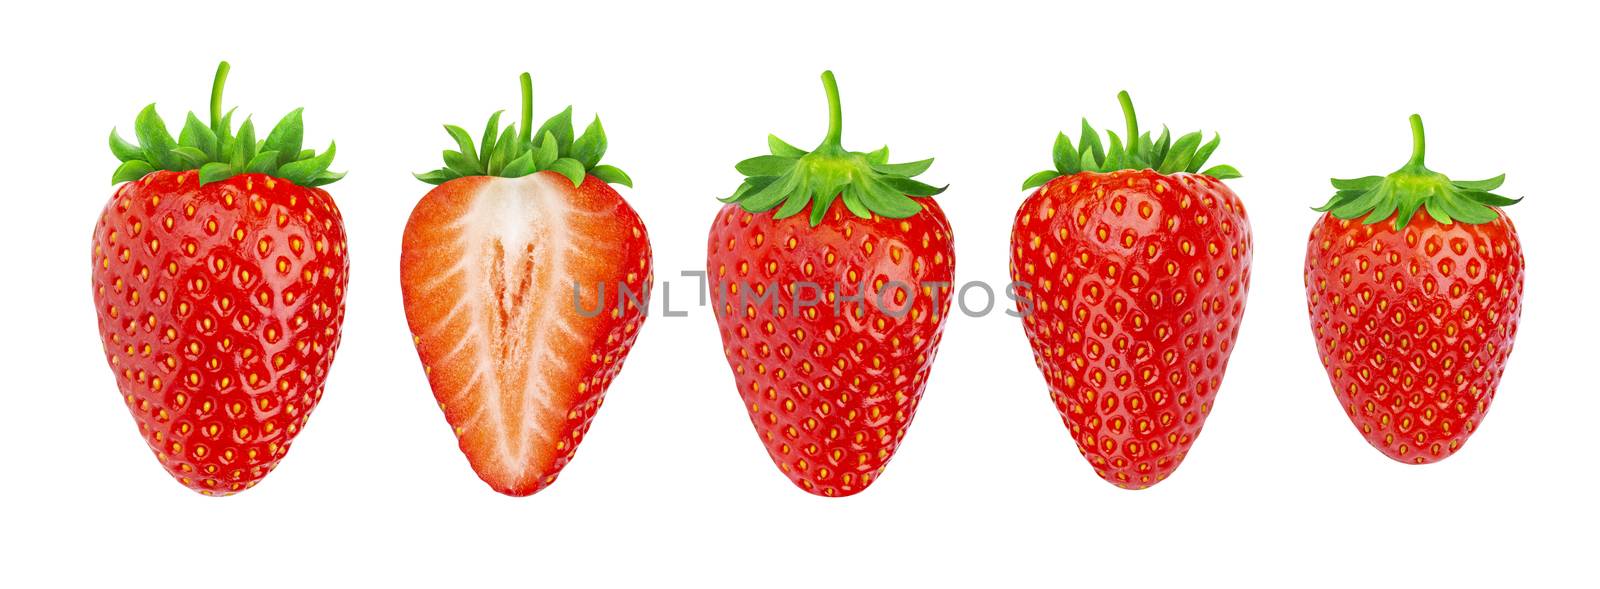 Strawberry isolated. Collection of strawberries isolated on white background by xamtiw